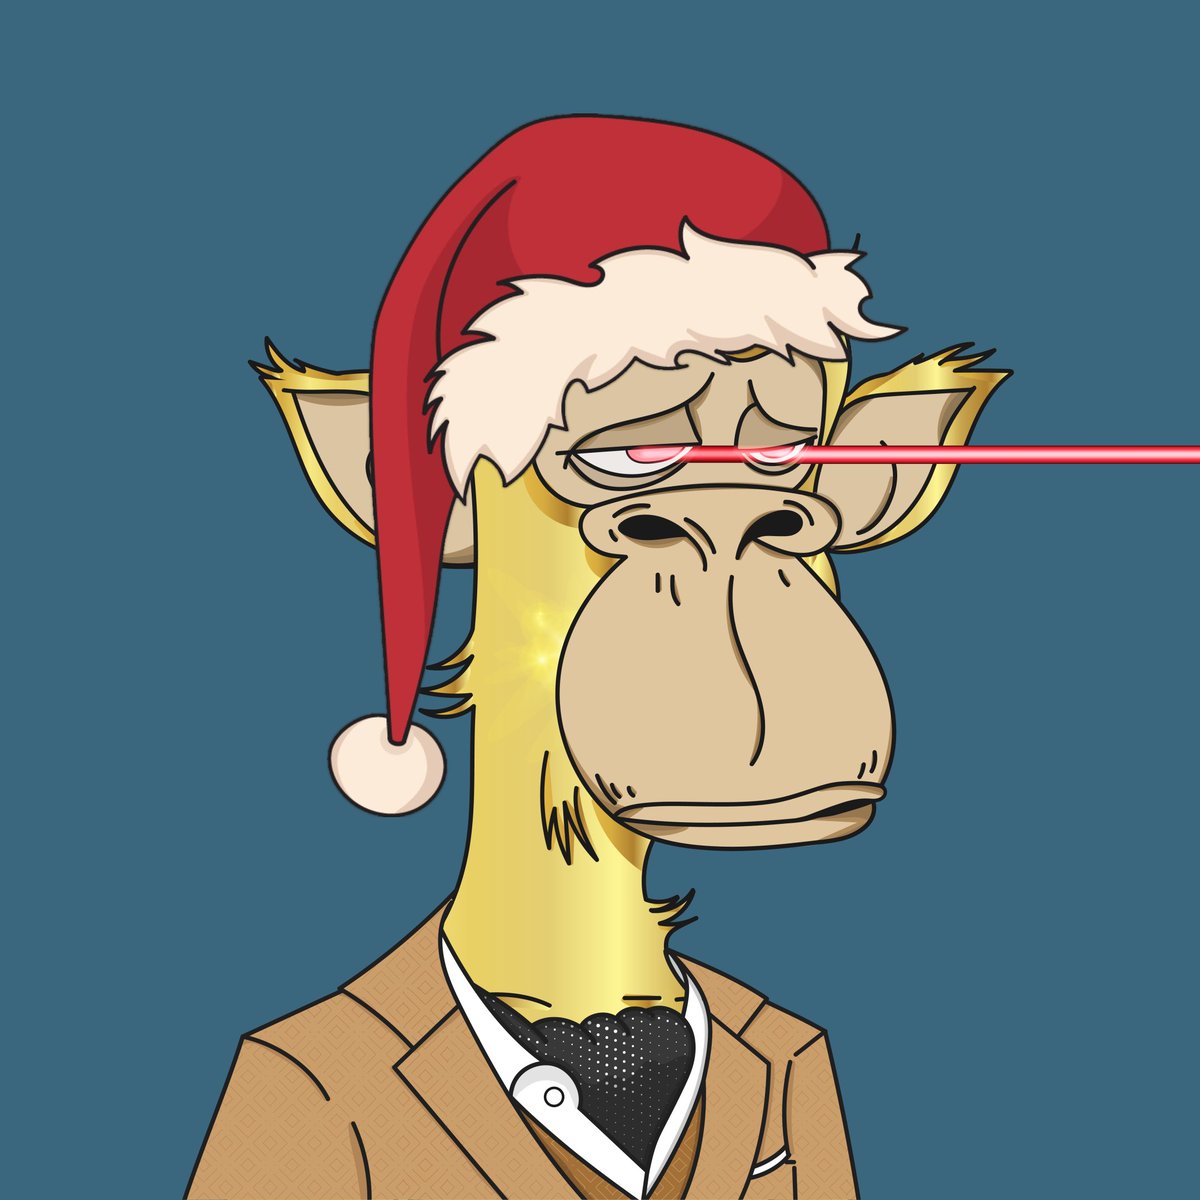 Want a Santa Hat for your APE? 👑 Let me know. Happy Holidays everyone. 🎉@BitApes_btc @0xPolygonApe @0xPolygonMutant